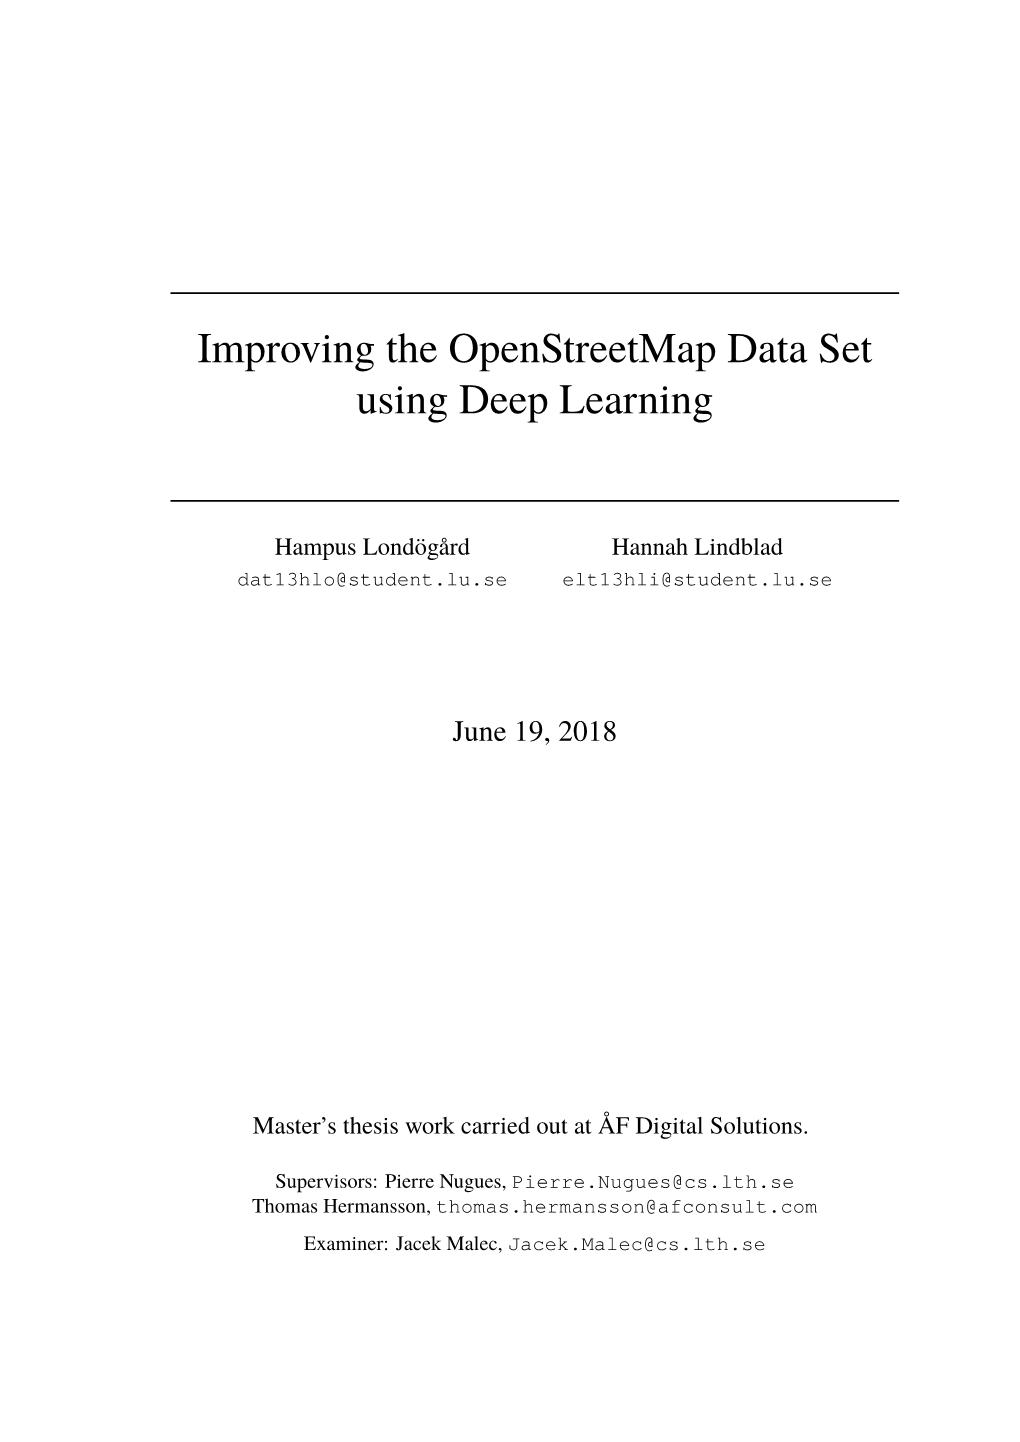 Improving the Openstreetmap Data Set Using Deep Learning